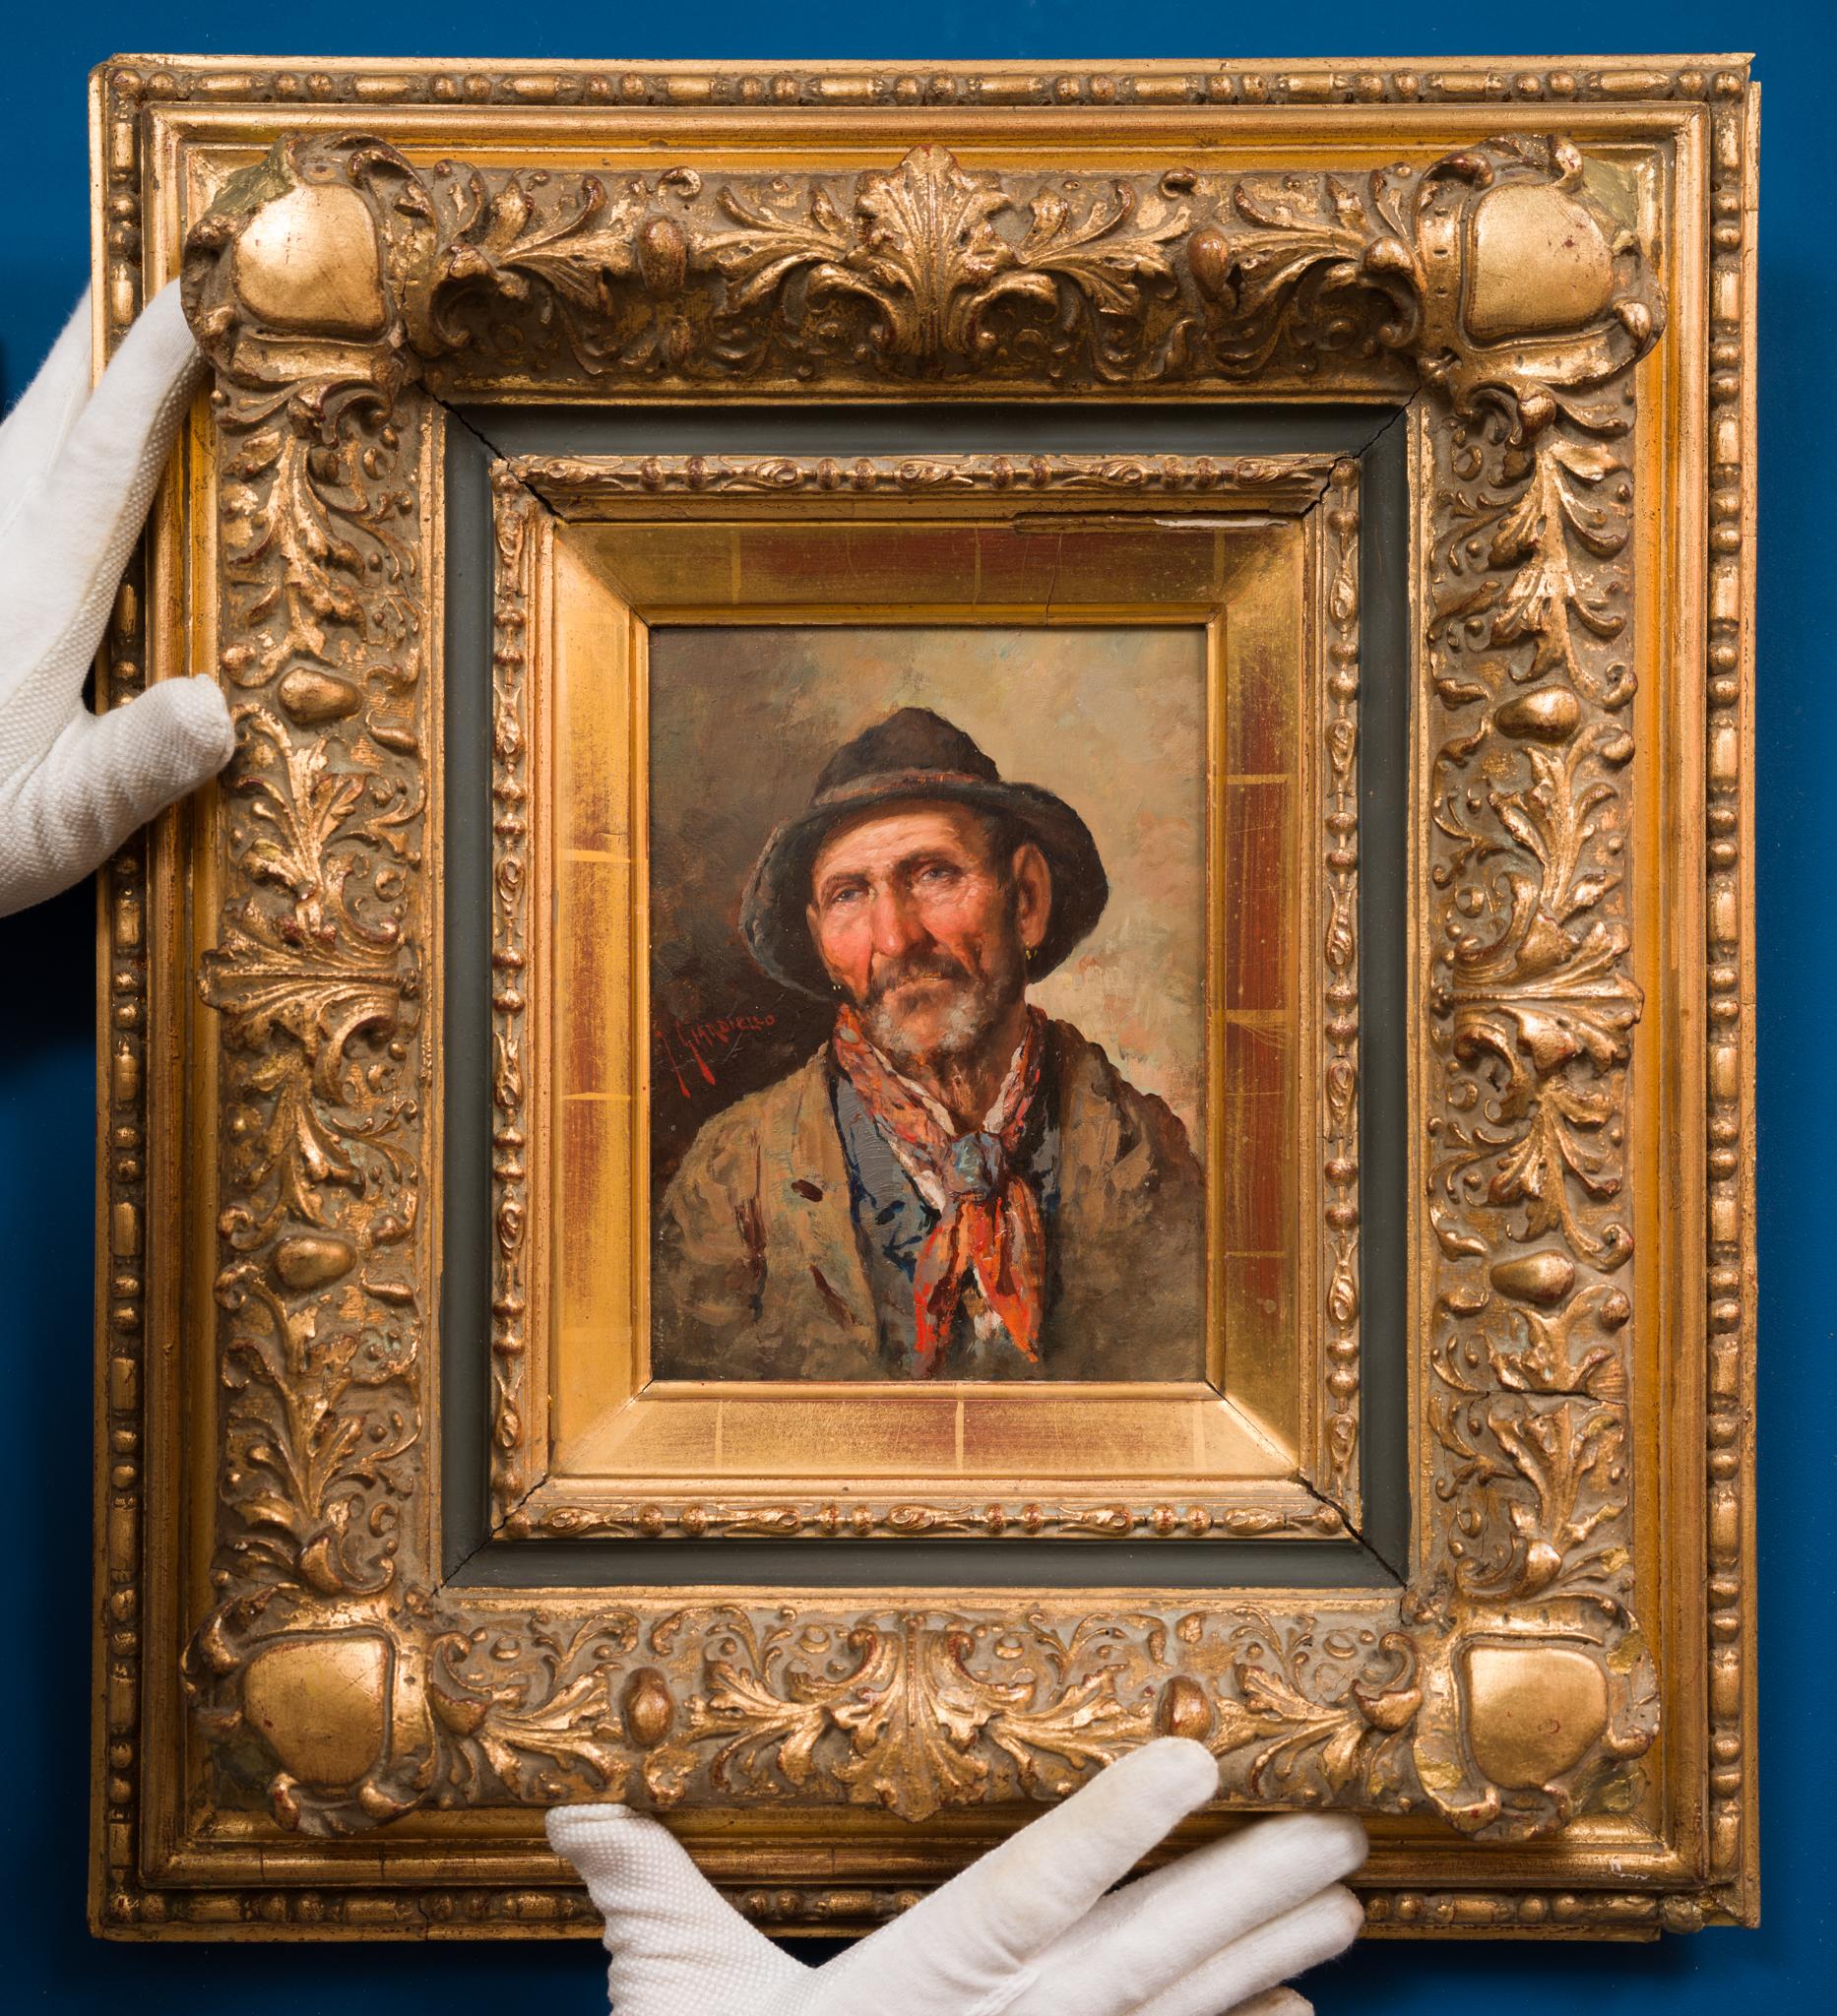 For sale is a beautiful small portrait by the Italian artist Giuseppe Giardinello, whose life spanned from 1887 to 1920. This work of art is a remarkable representation of Giardinello's ability to convey a profound sense of character through his